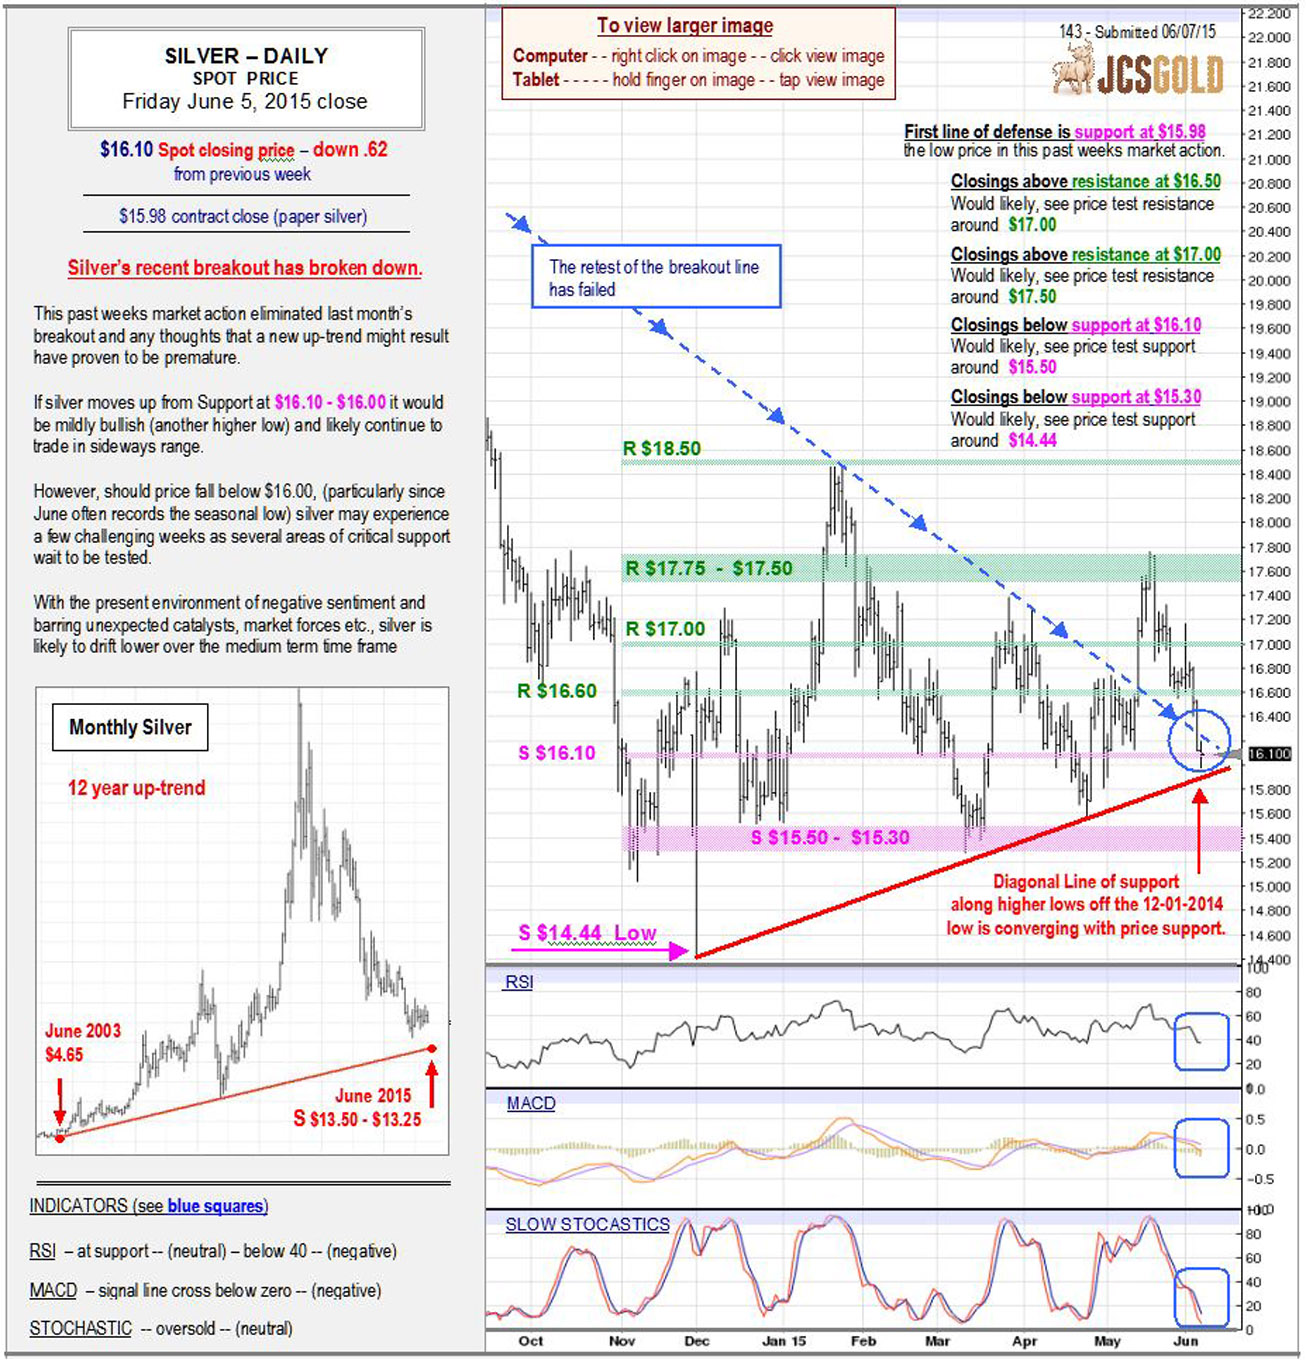 June 5, 2015 chart & commentary